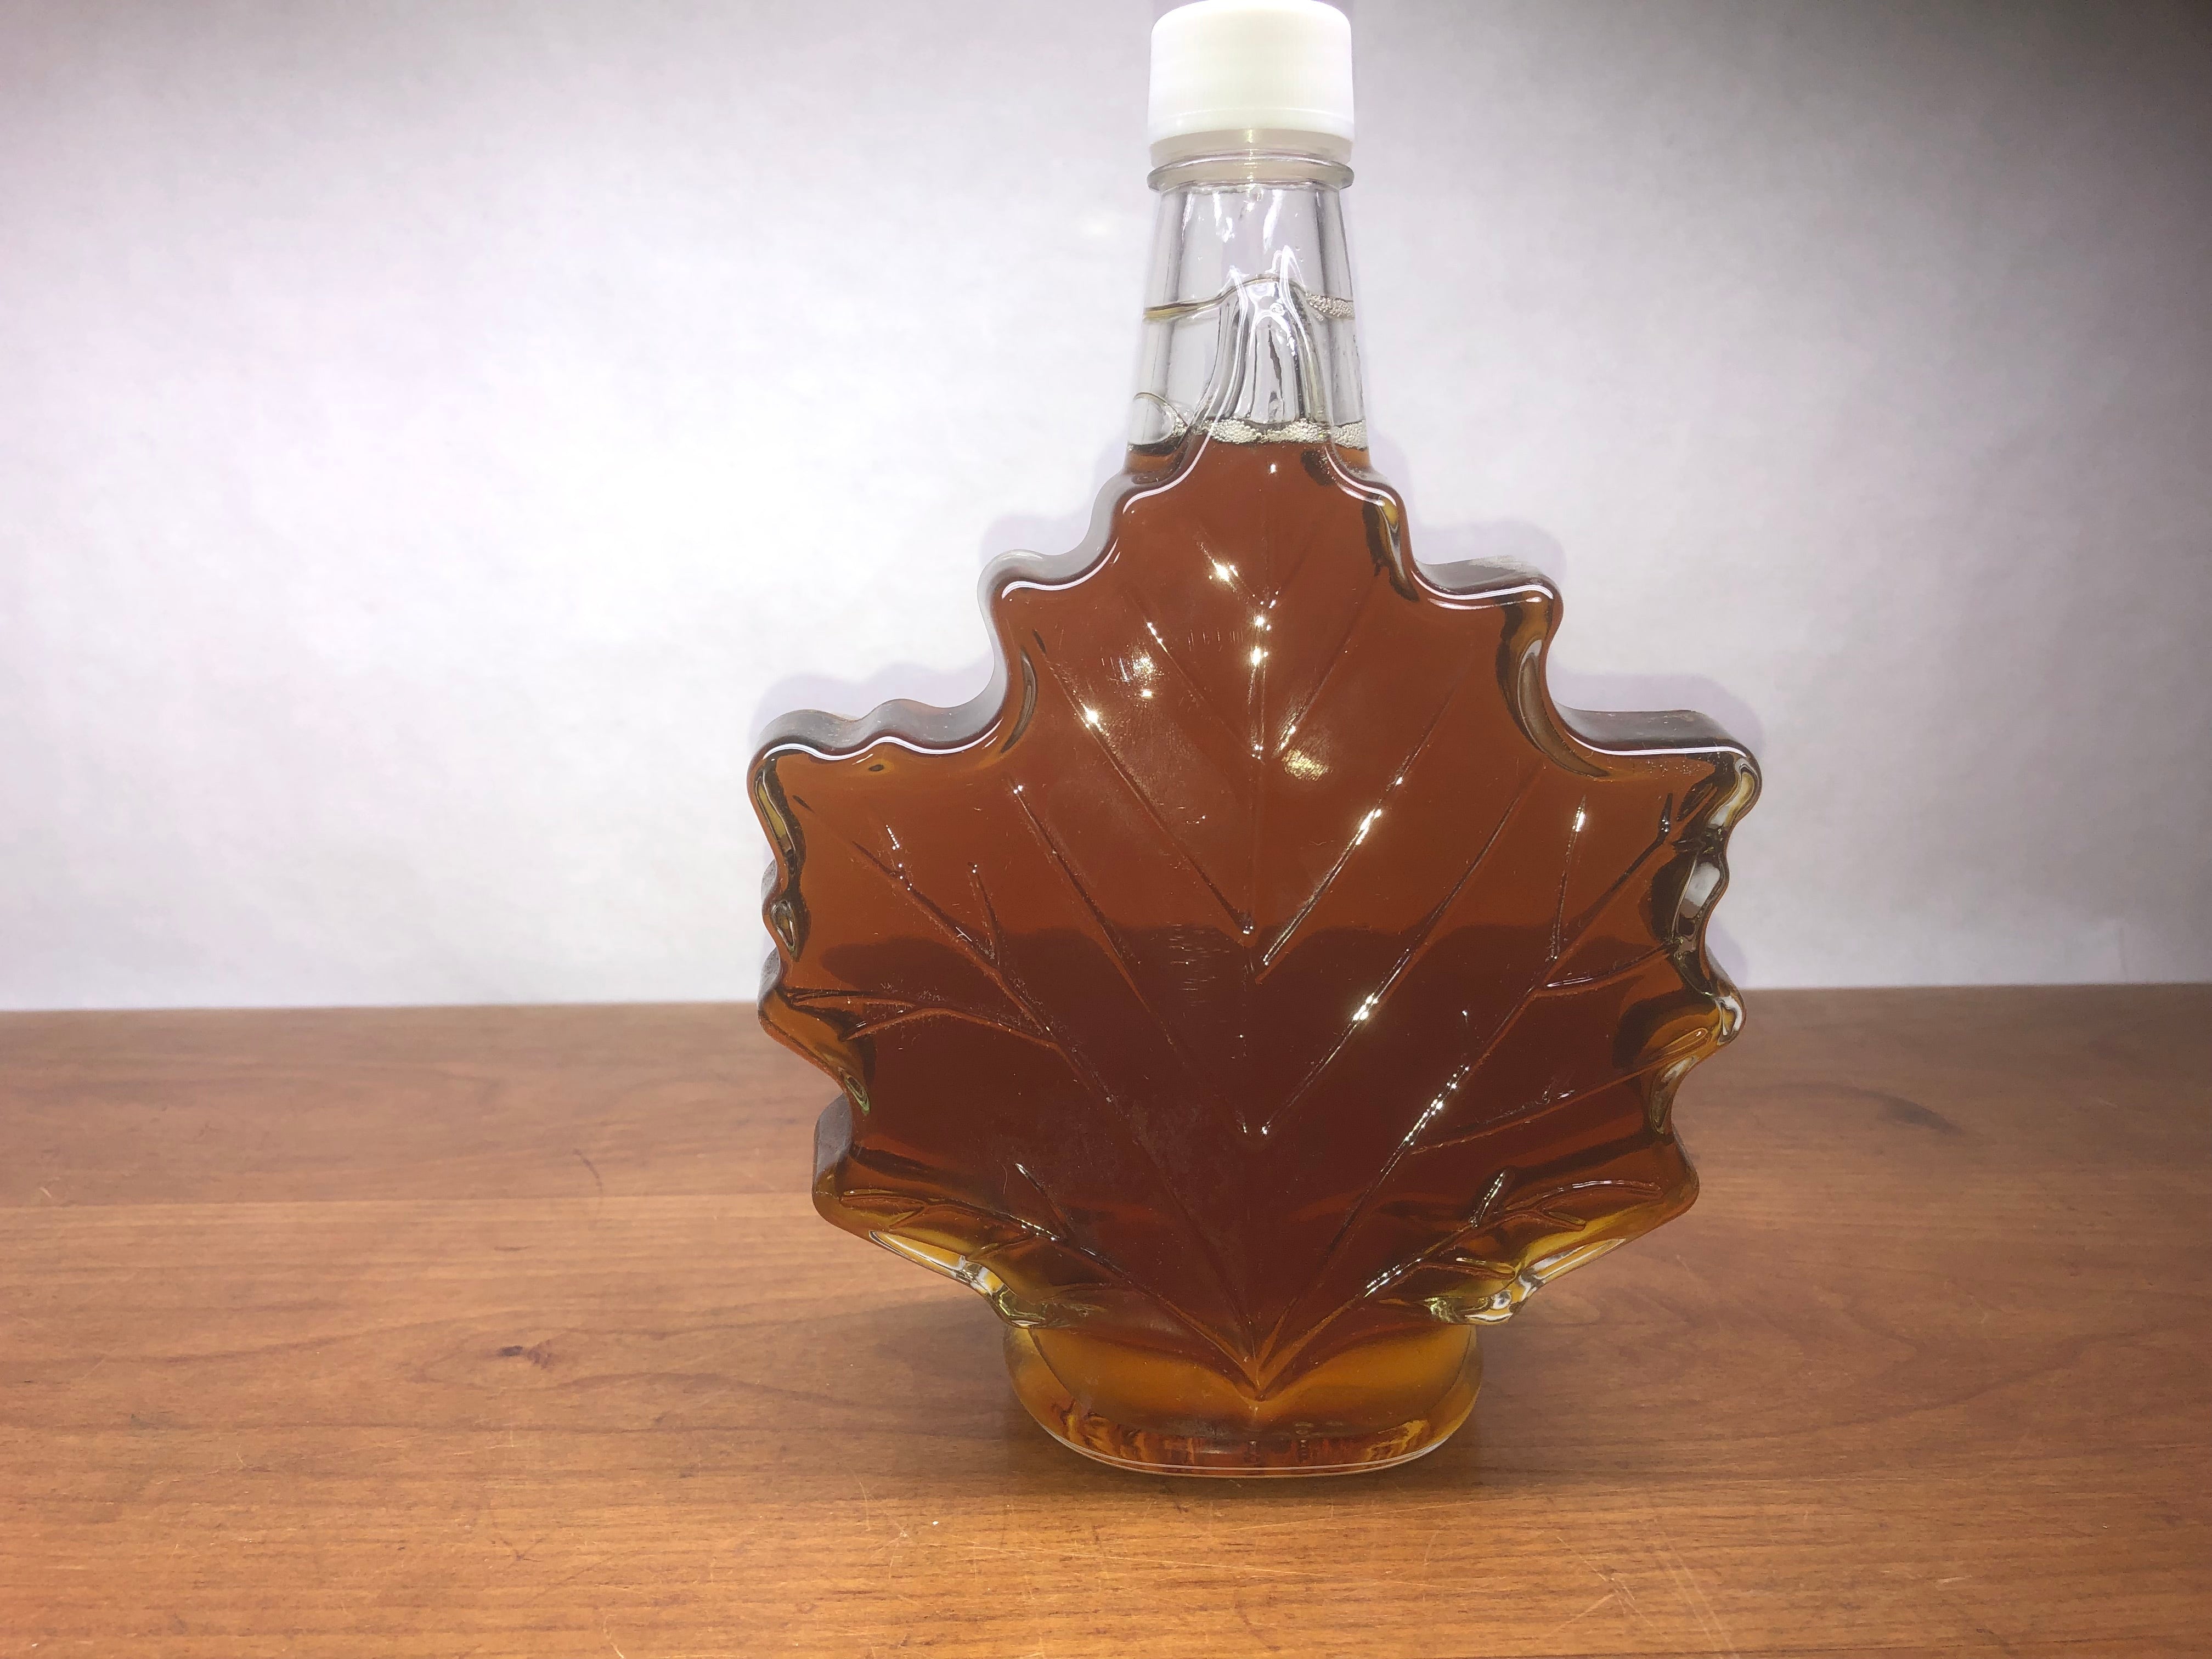 Certified Organic Syrup: Maple Leaf Shaped Glass